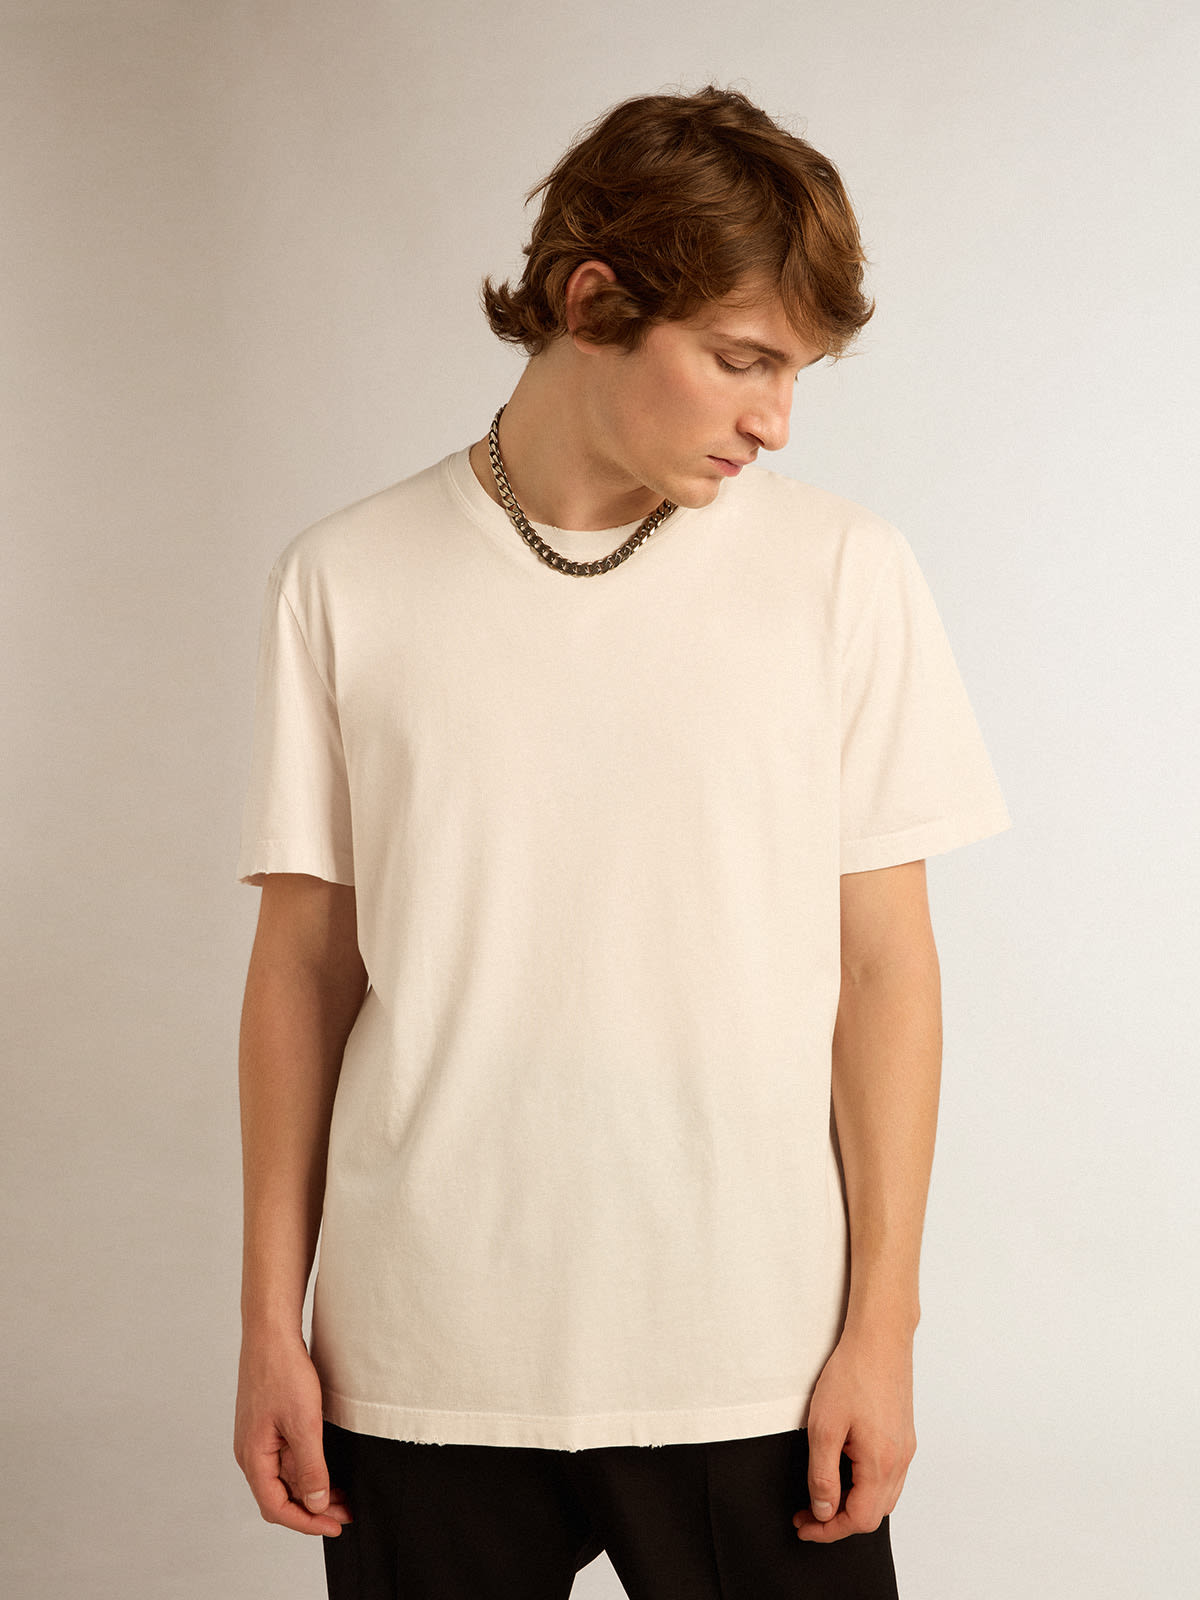 Golden Goose - Golden Collection T-shirt in white with a distressed treatment in 